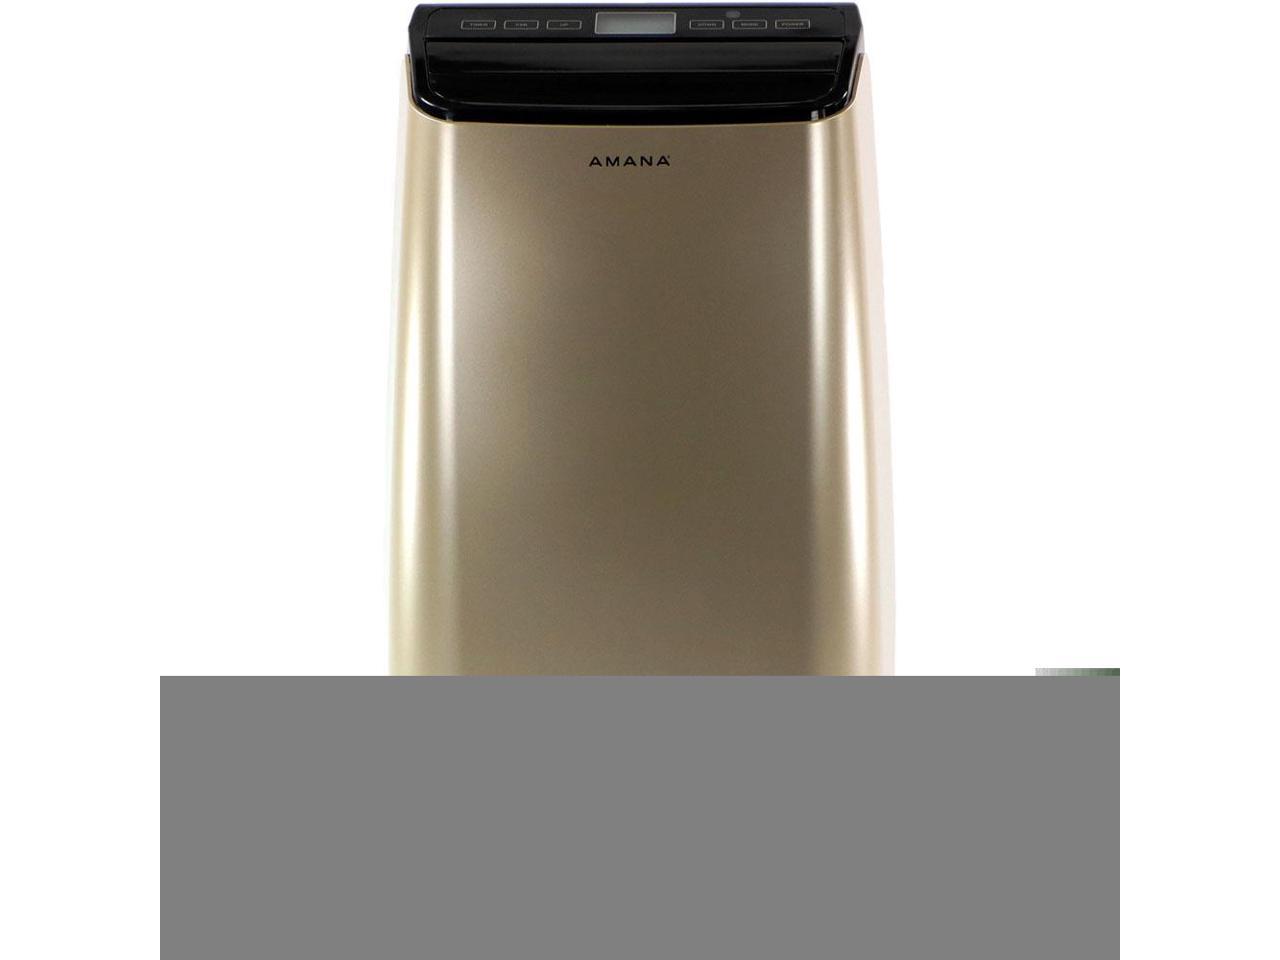 Amana 10,000 BTU Portable Air Conditioner with Remote Control in Gold